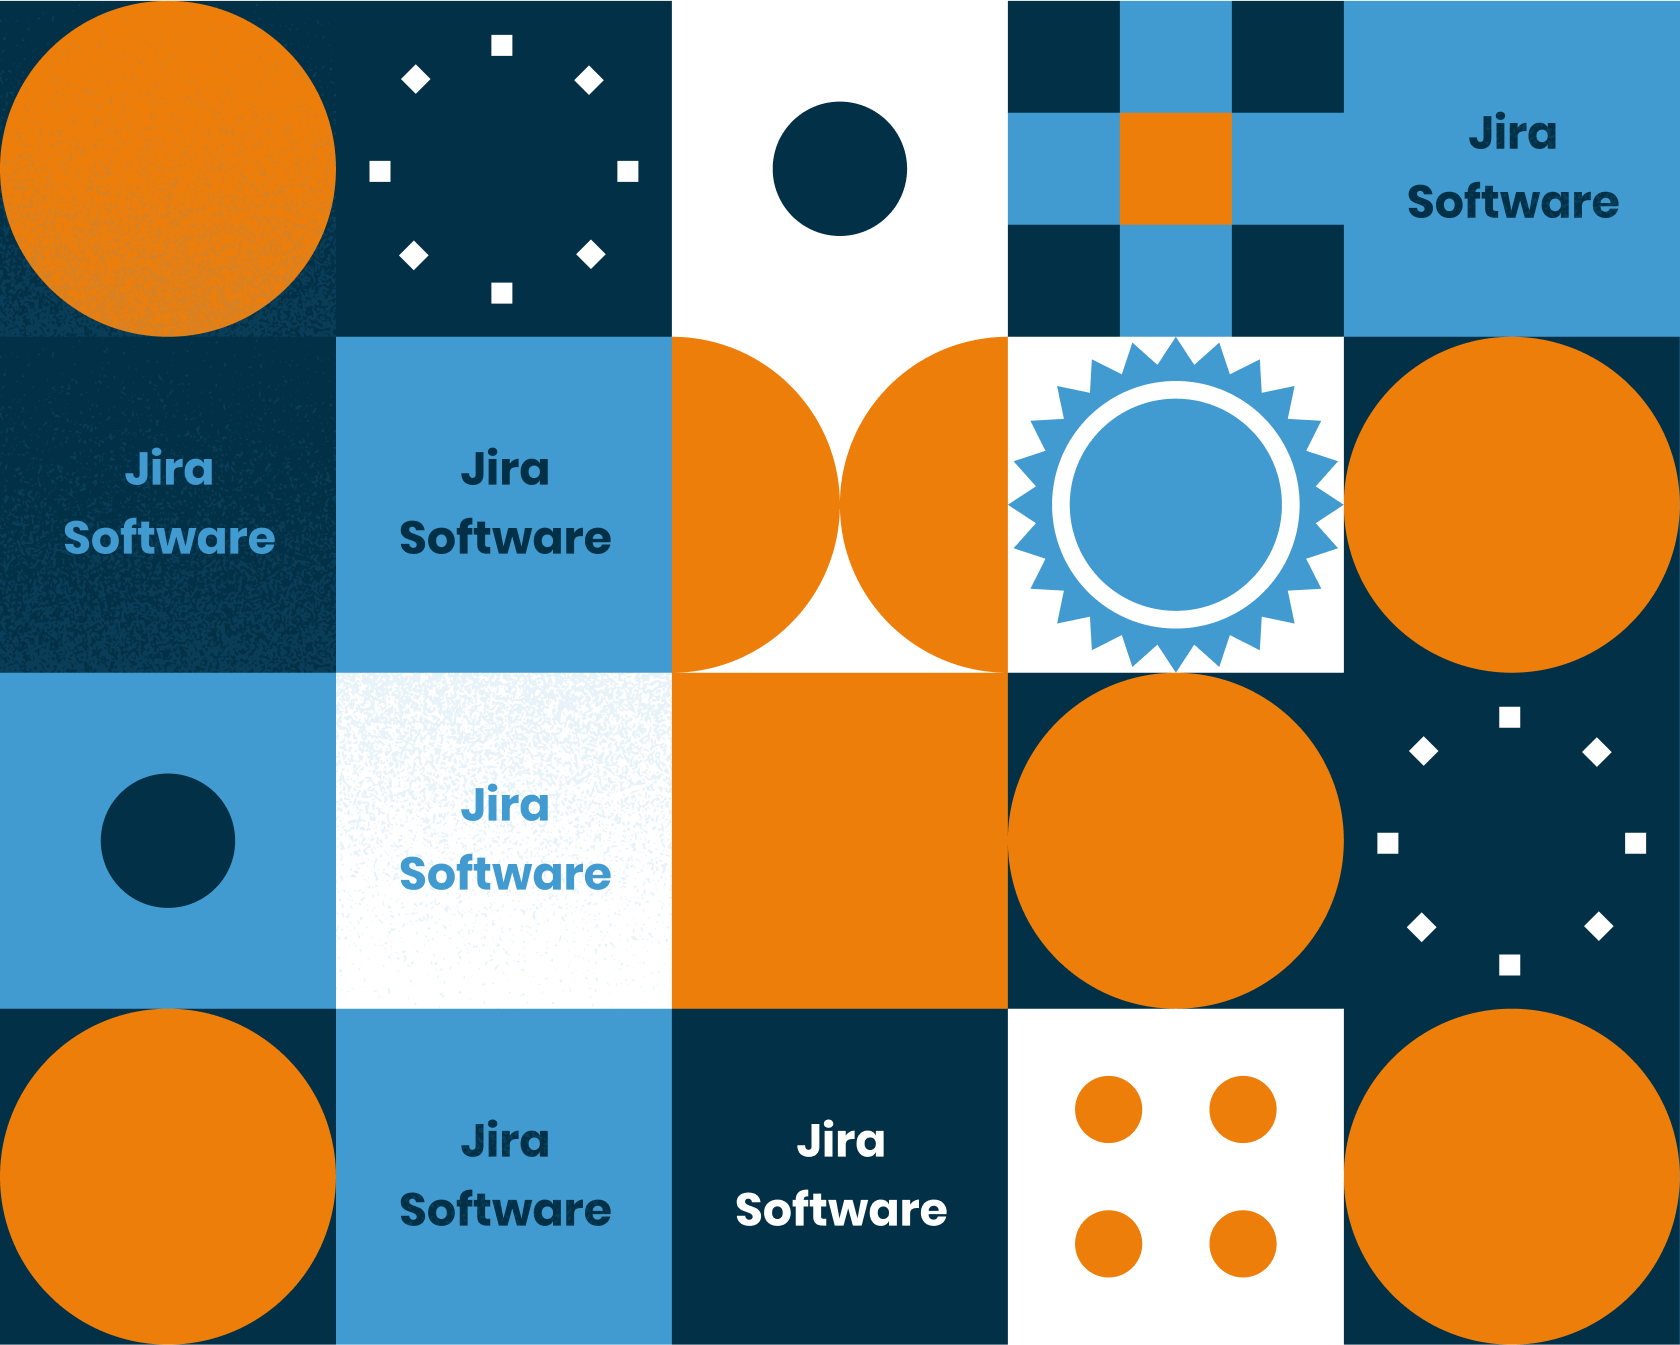 A team using Jira Software to collaborate and manage projects in a company setting